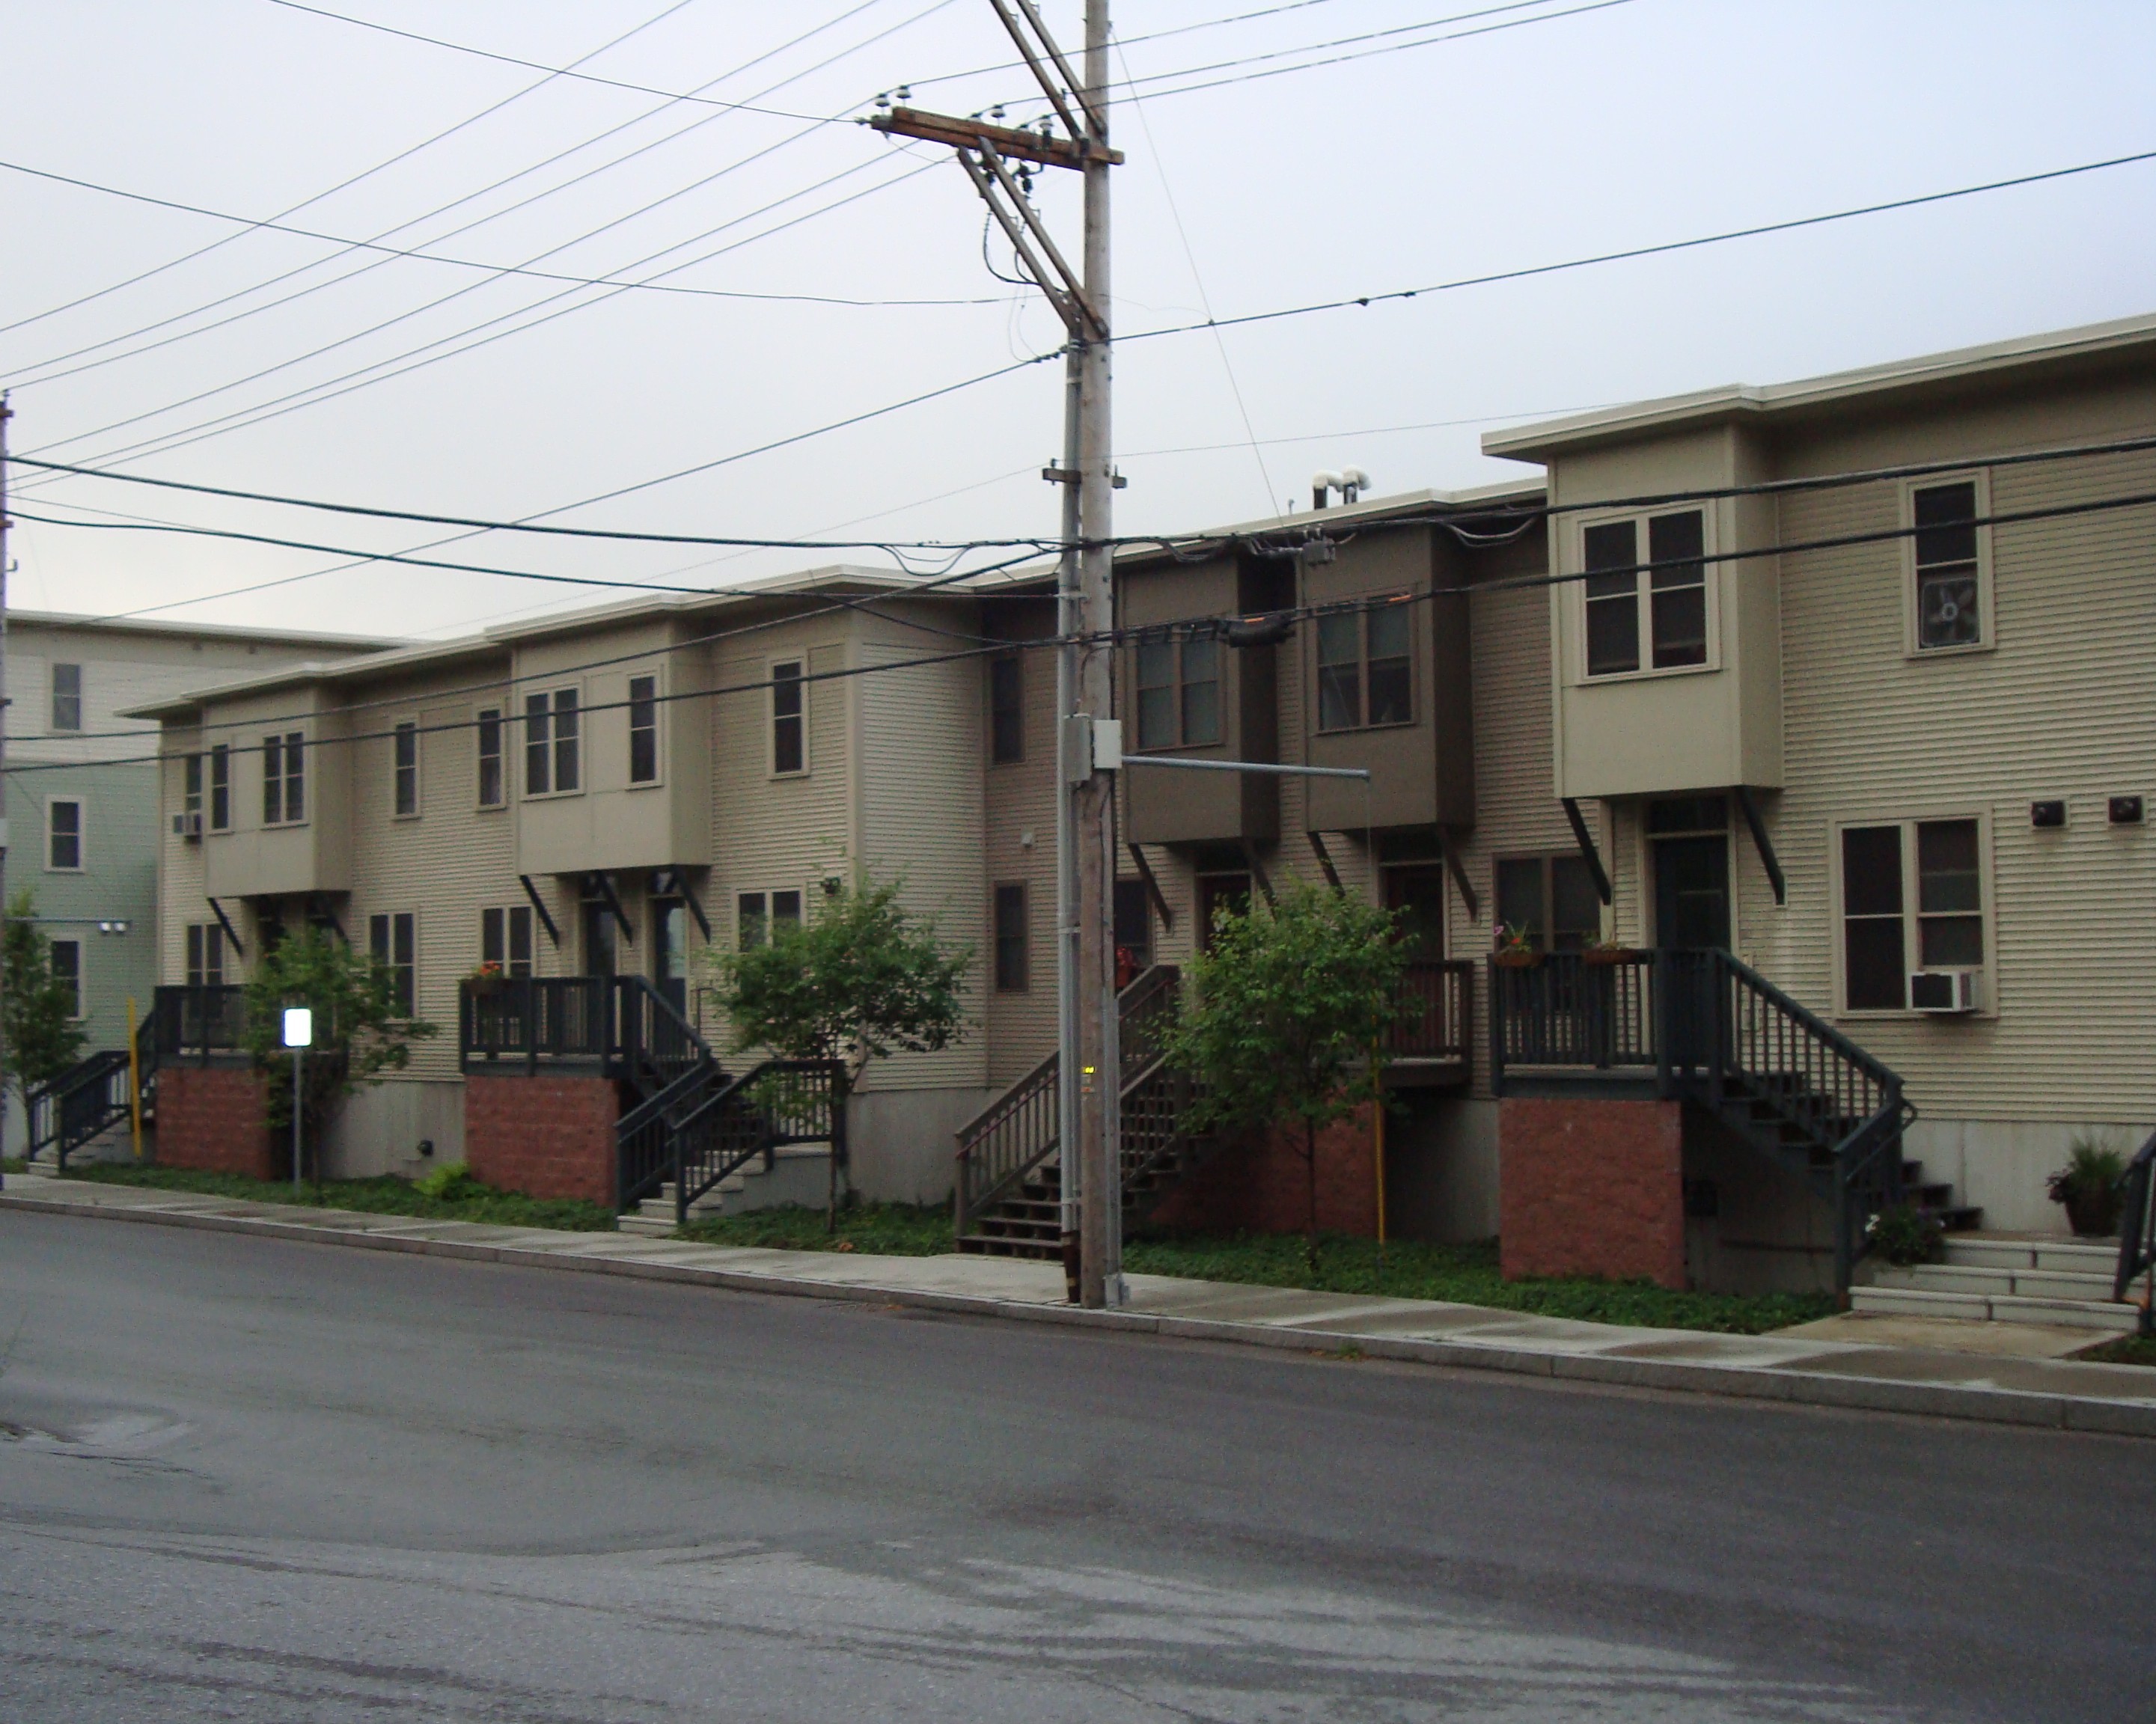 downstreet river station apartments